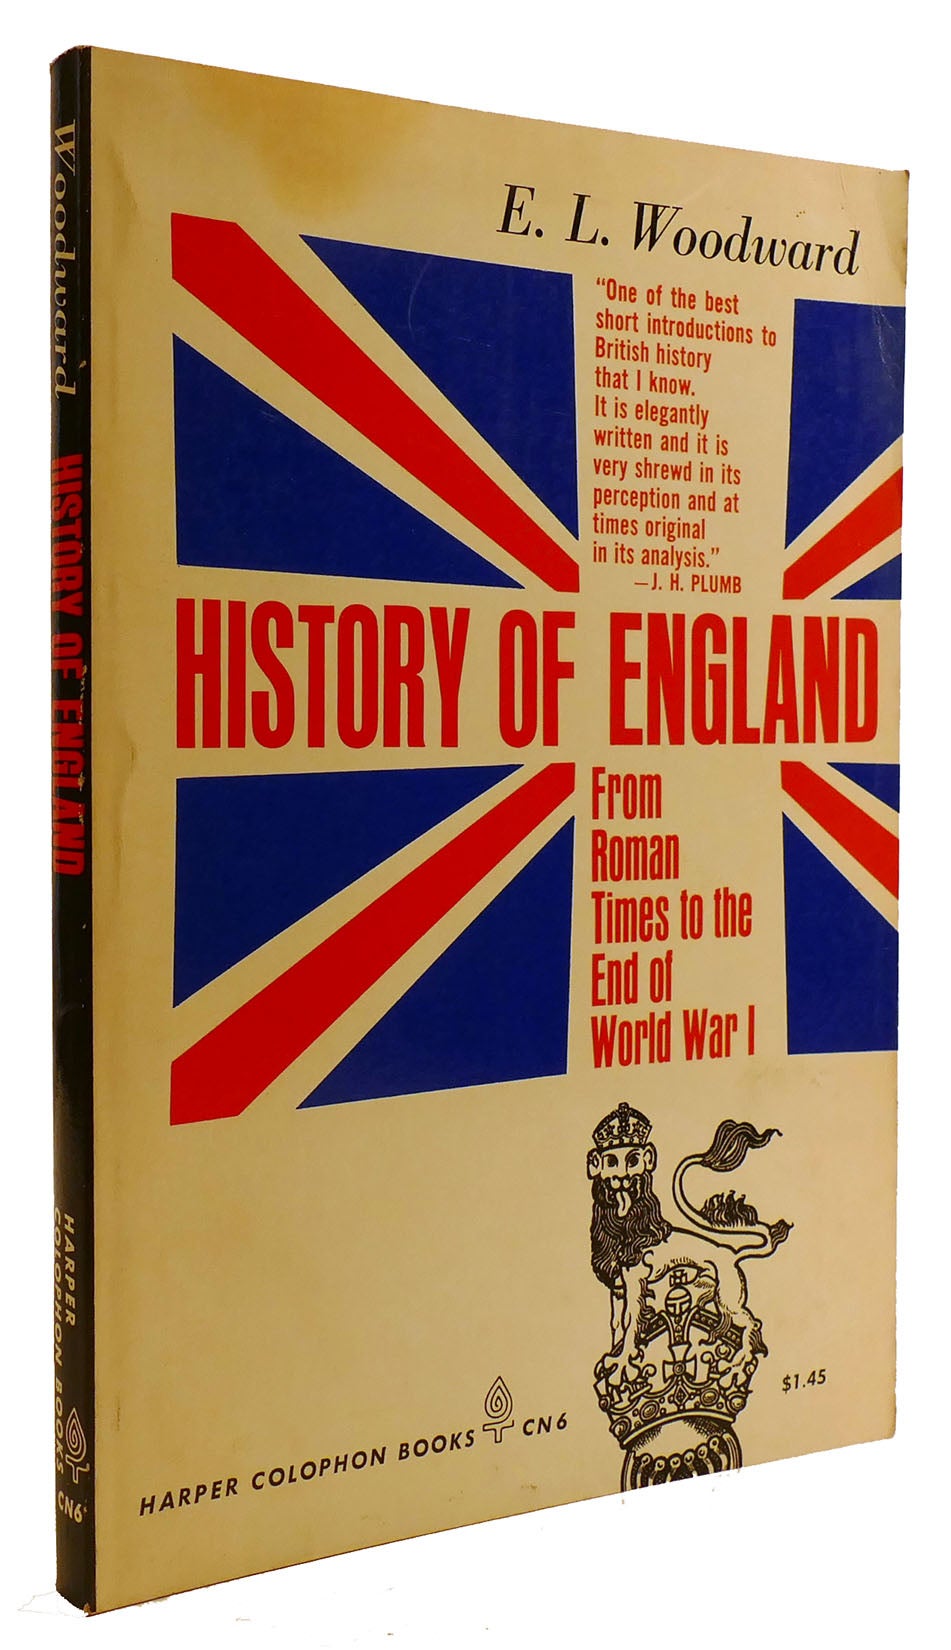 Edition　END　OF　WORLD　ROMAN　TO　E.　First　I.　Woodward　OF　First　Printing　THE　TIMES　FROM　L.　HISTORY　Thus;　ENGLAND:　WAR